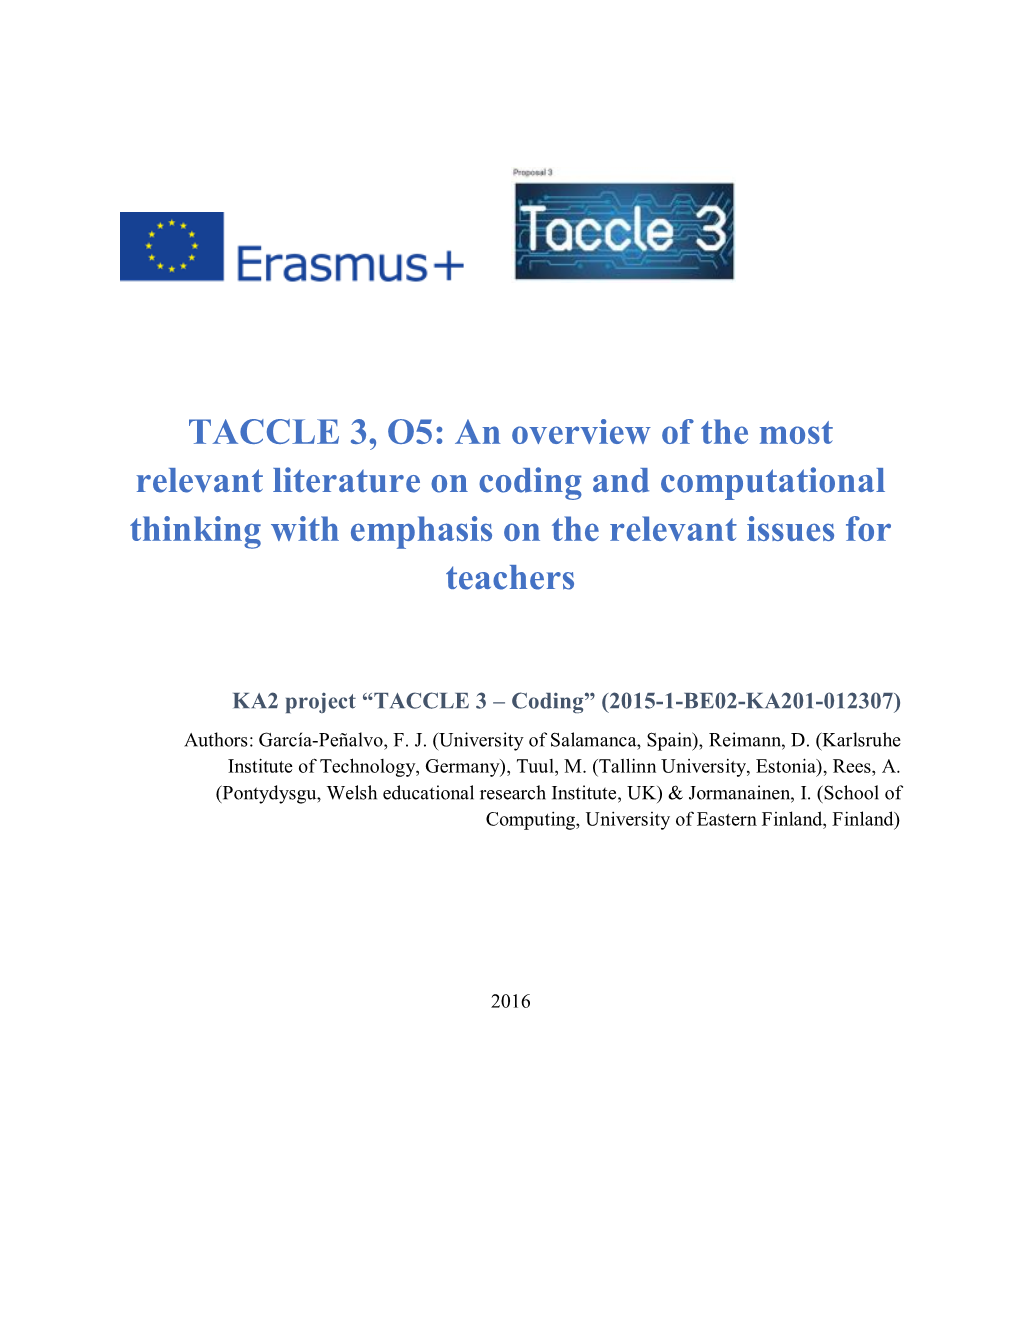 TACCLE 3, O5: an Overview of the Most Relevant Literature on Coding and Computational Thinking with Emphasis on the Relevant Issues For